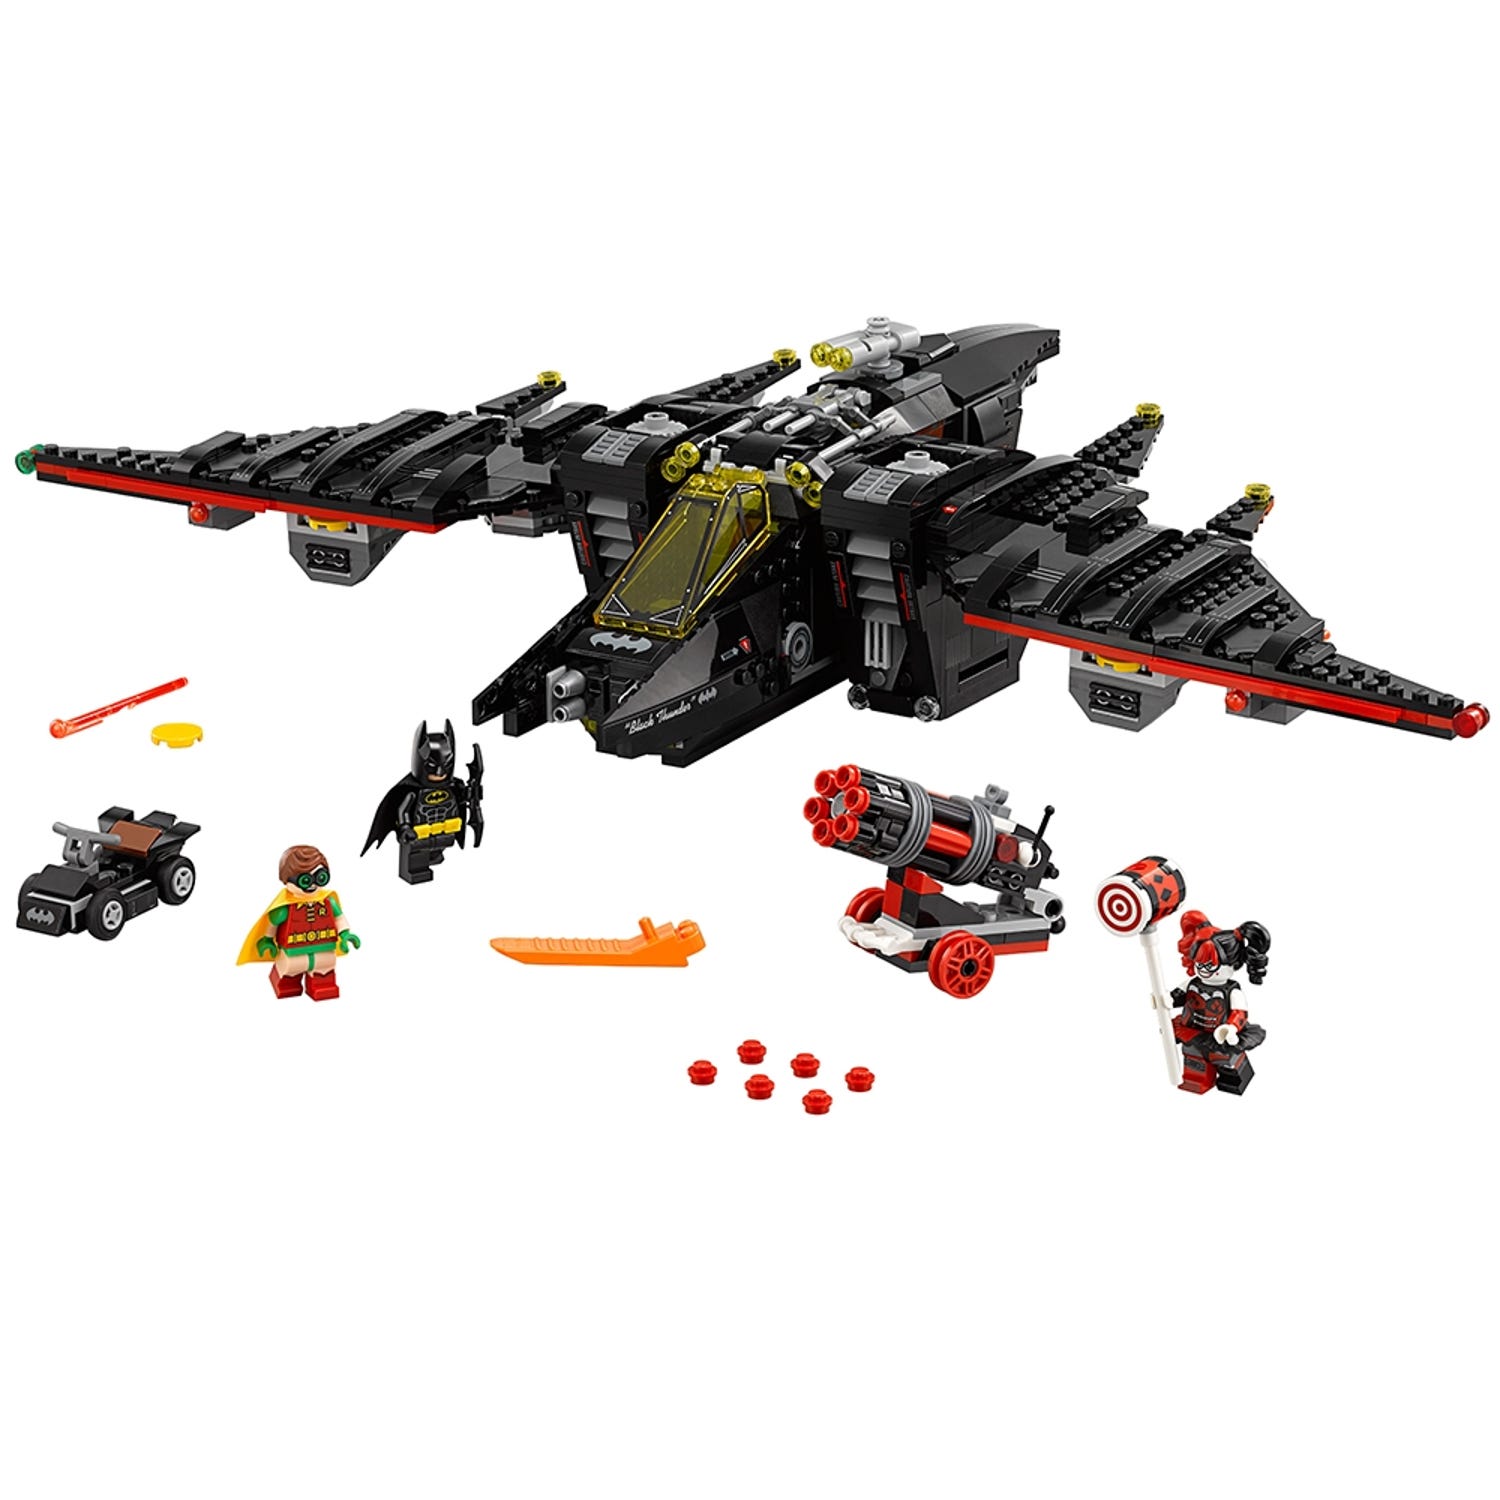 The Batwing 70916 THE LEGO® BATMAN MOVIE Buy online at the Official